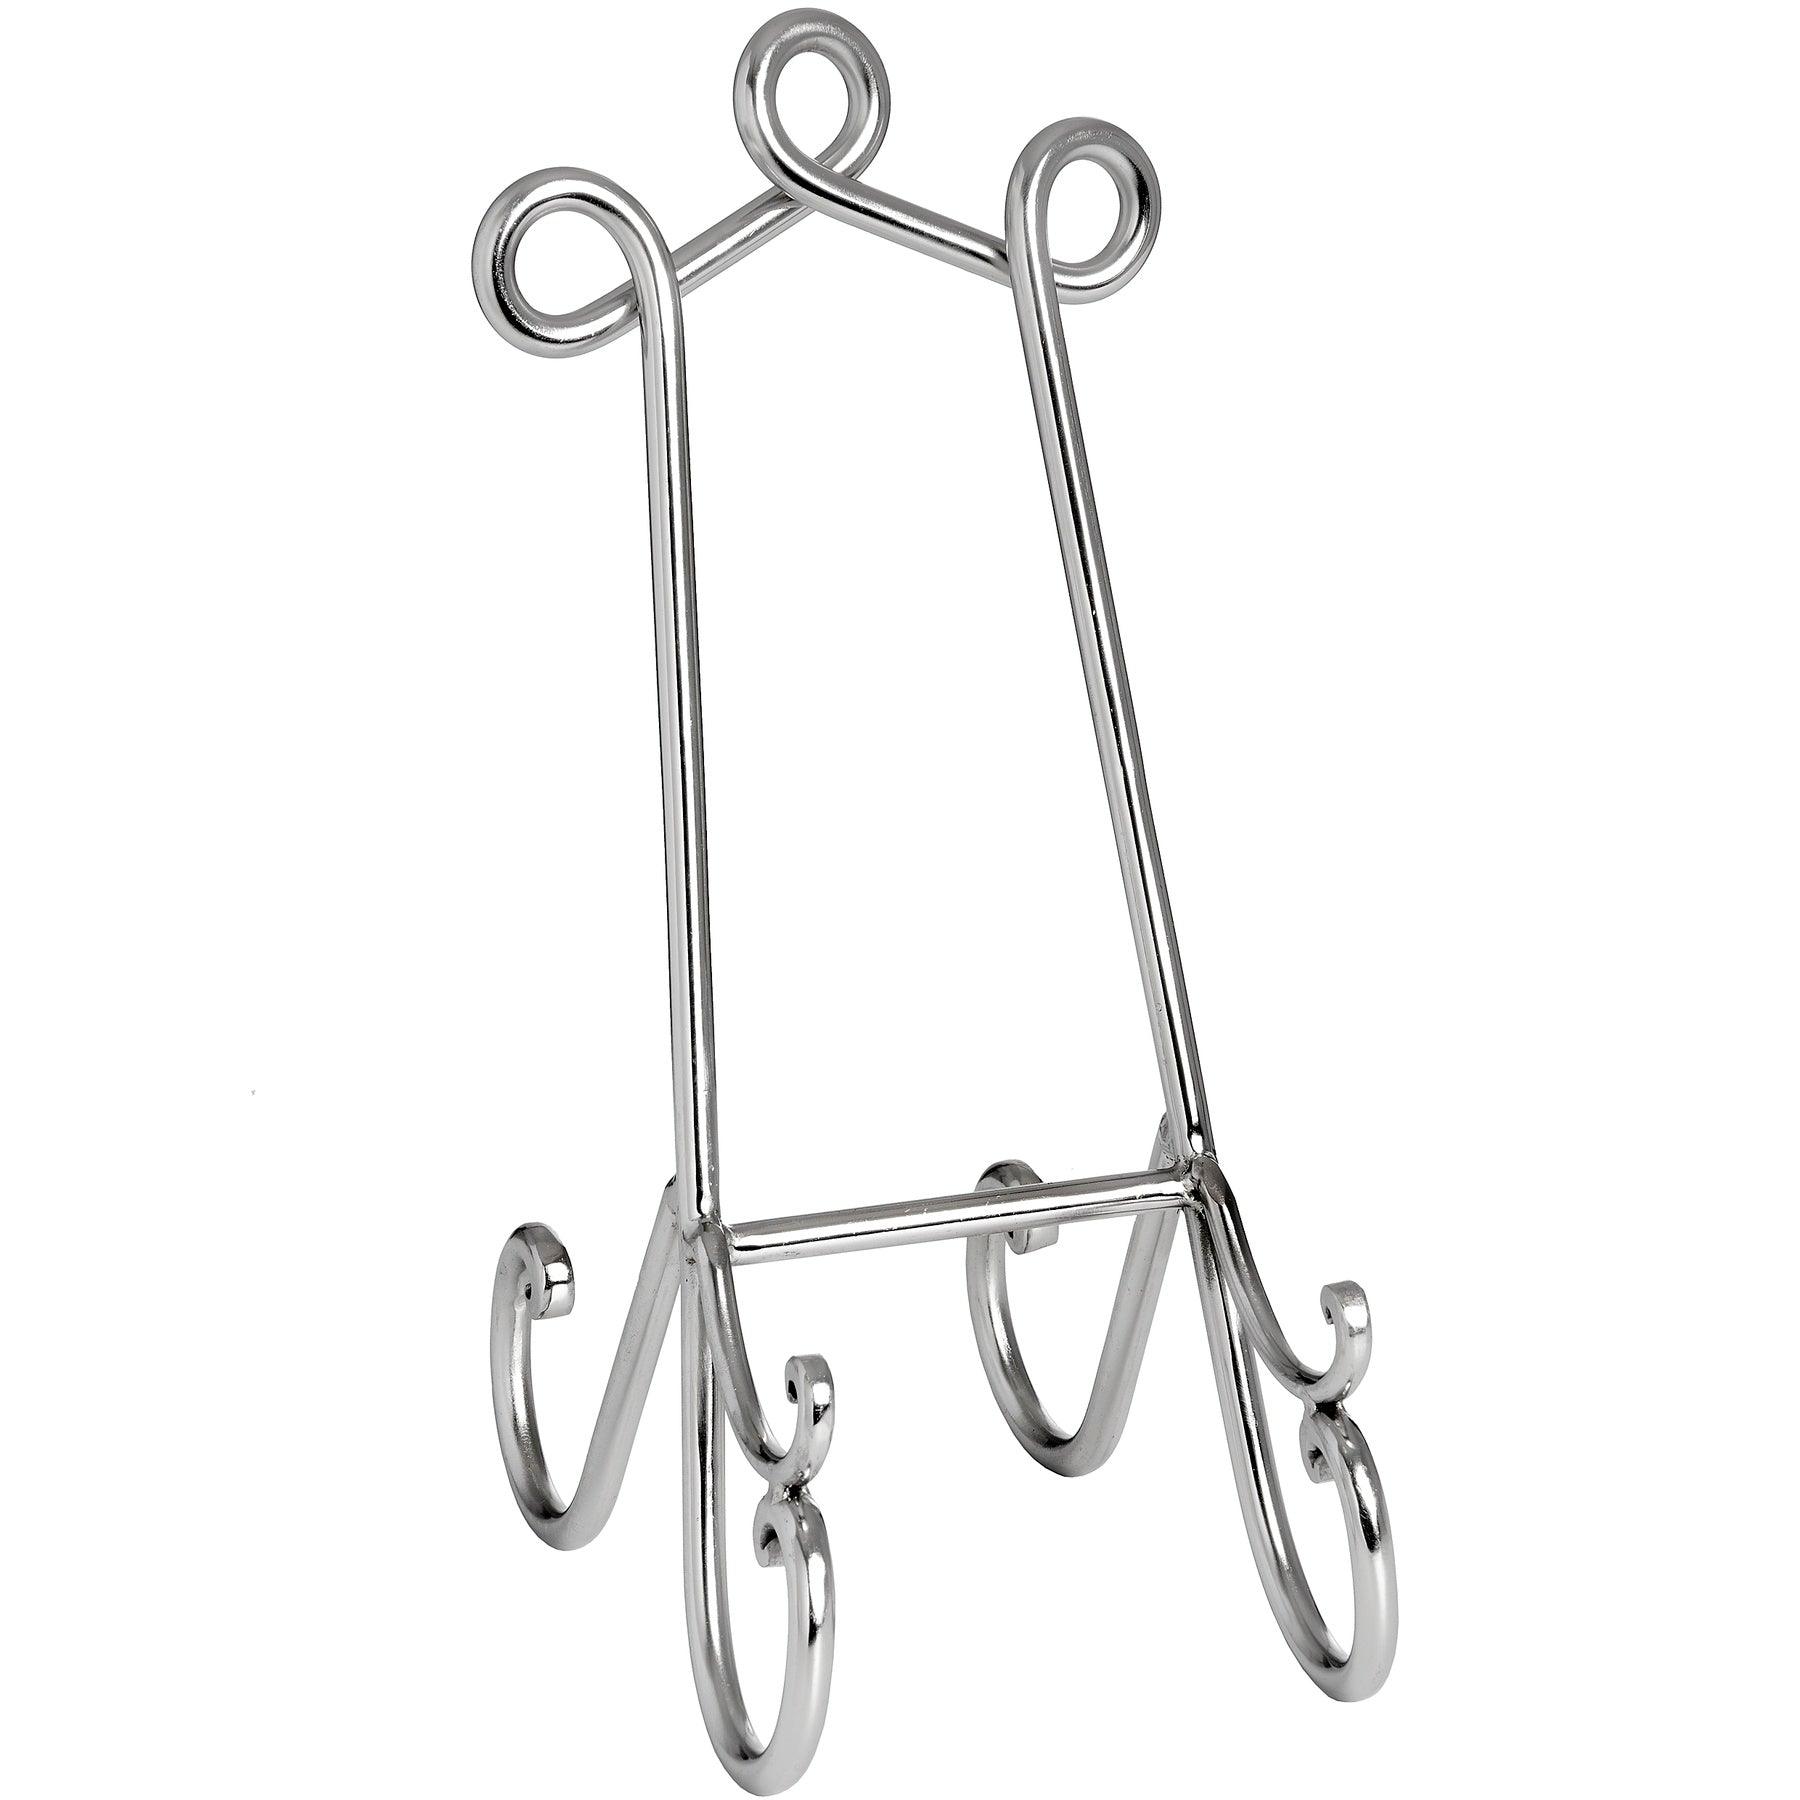 View Small Nickel Easel information